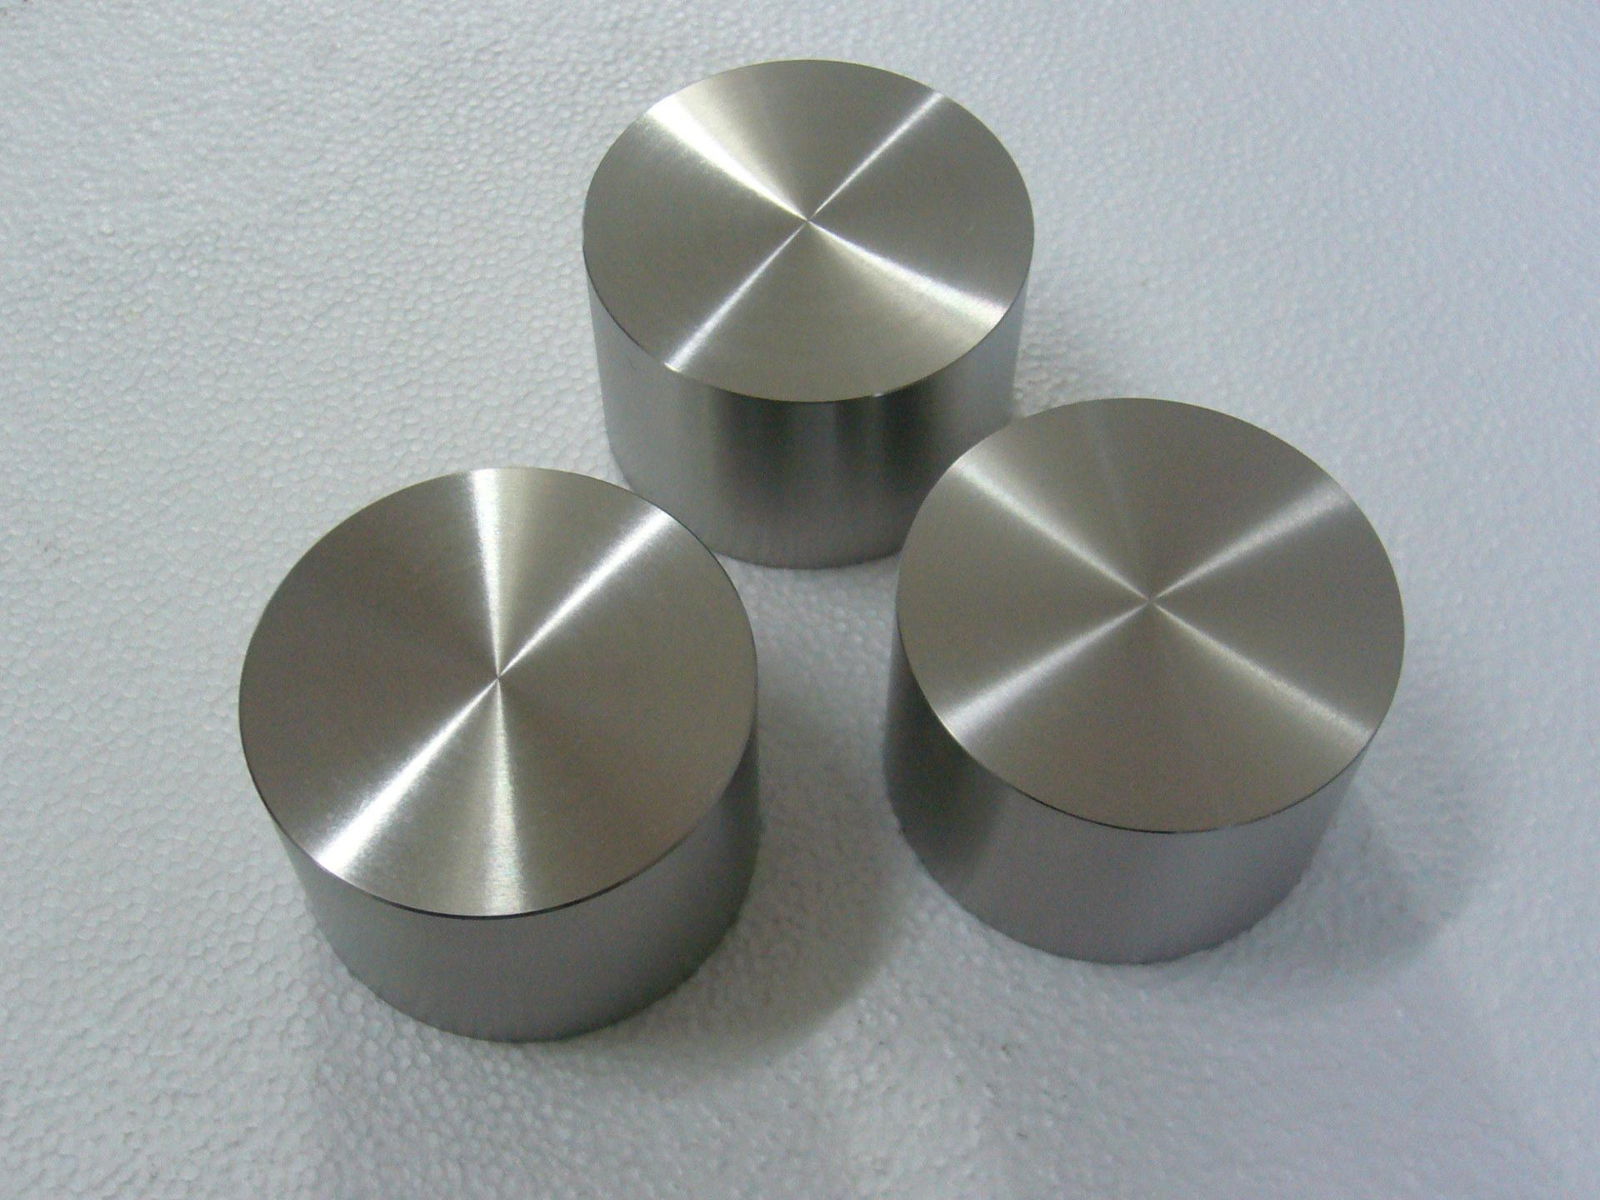 High quality of titanium cake or its alloy 